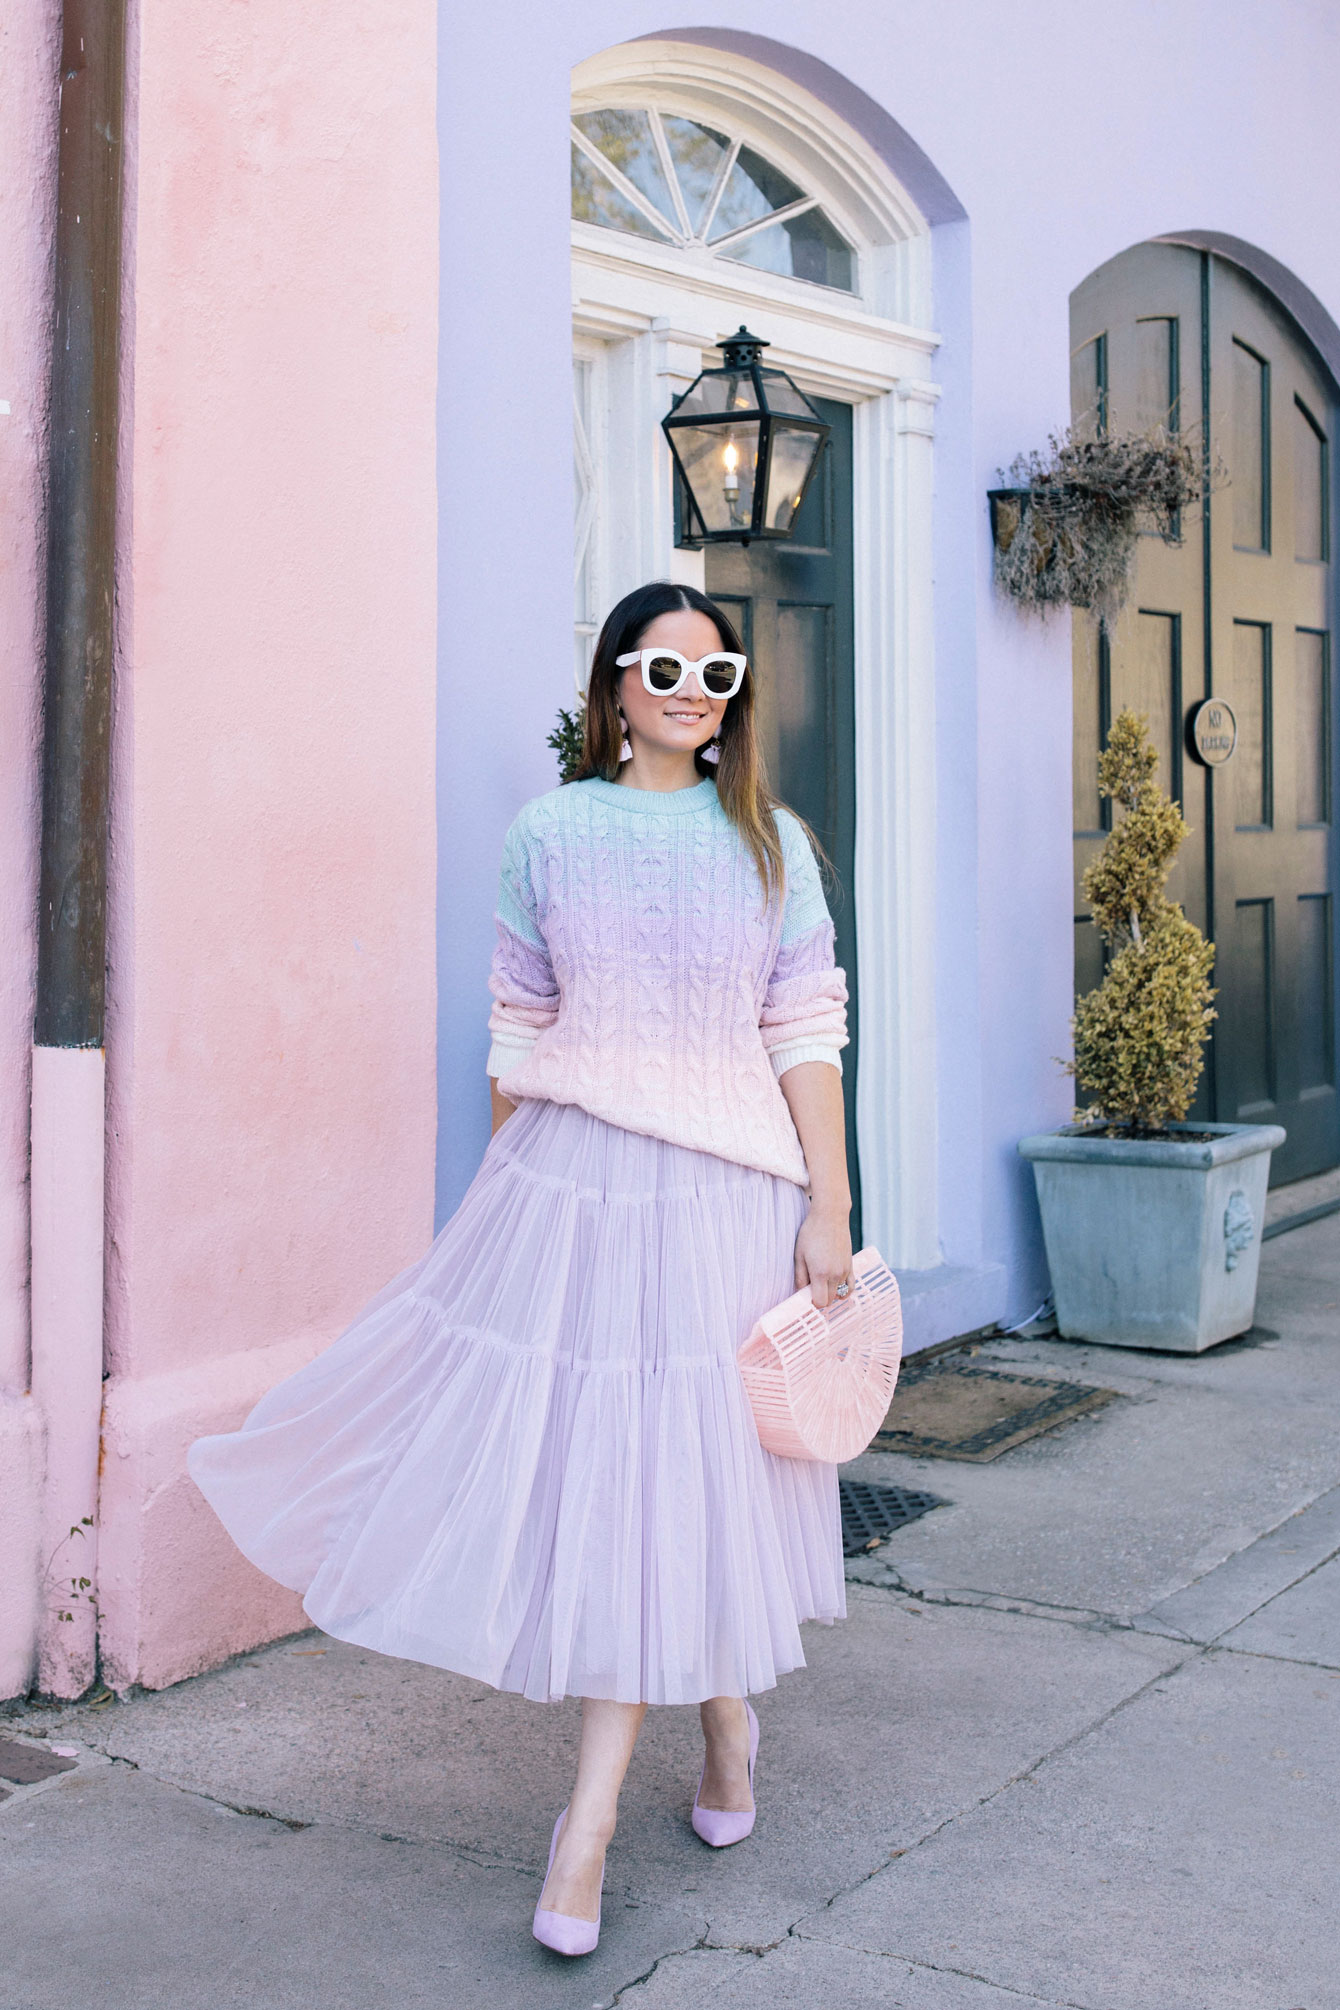 Ombré Pastel Sweater and Tulle Skirt in Charleston